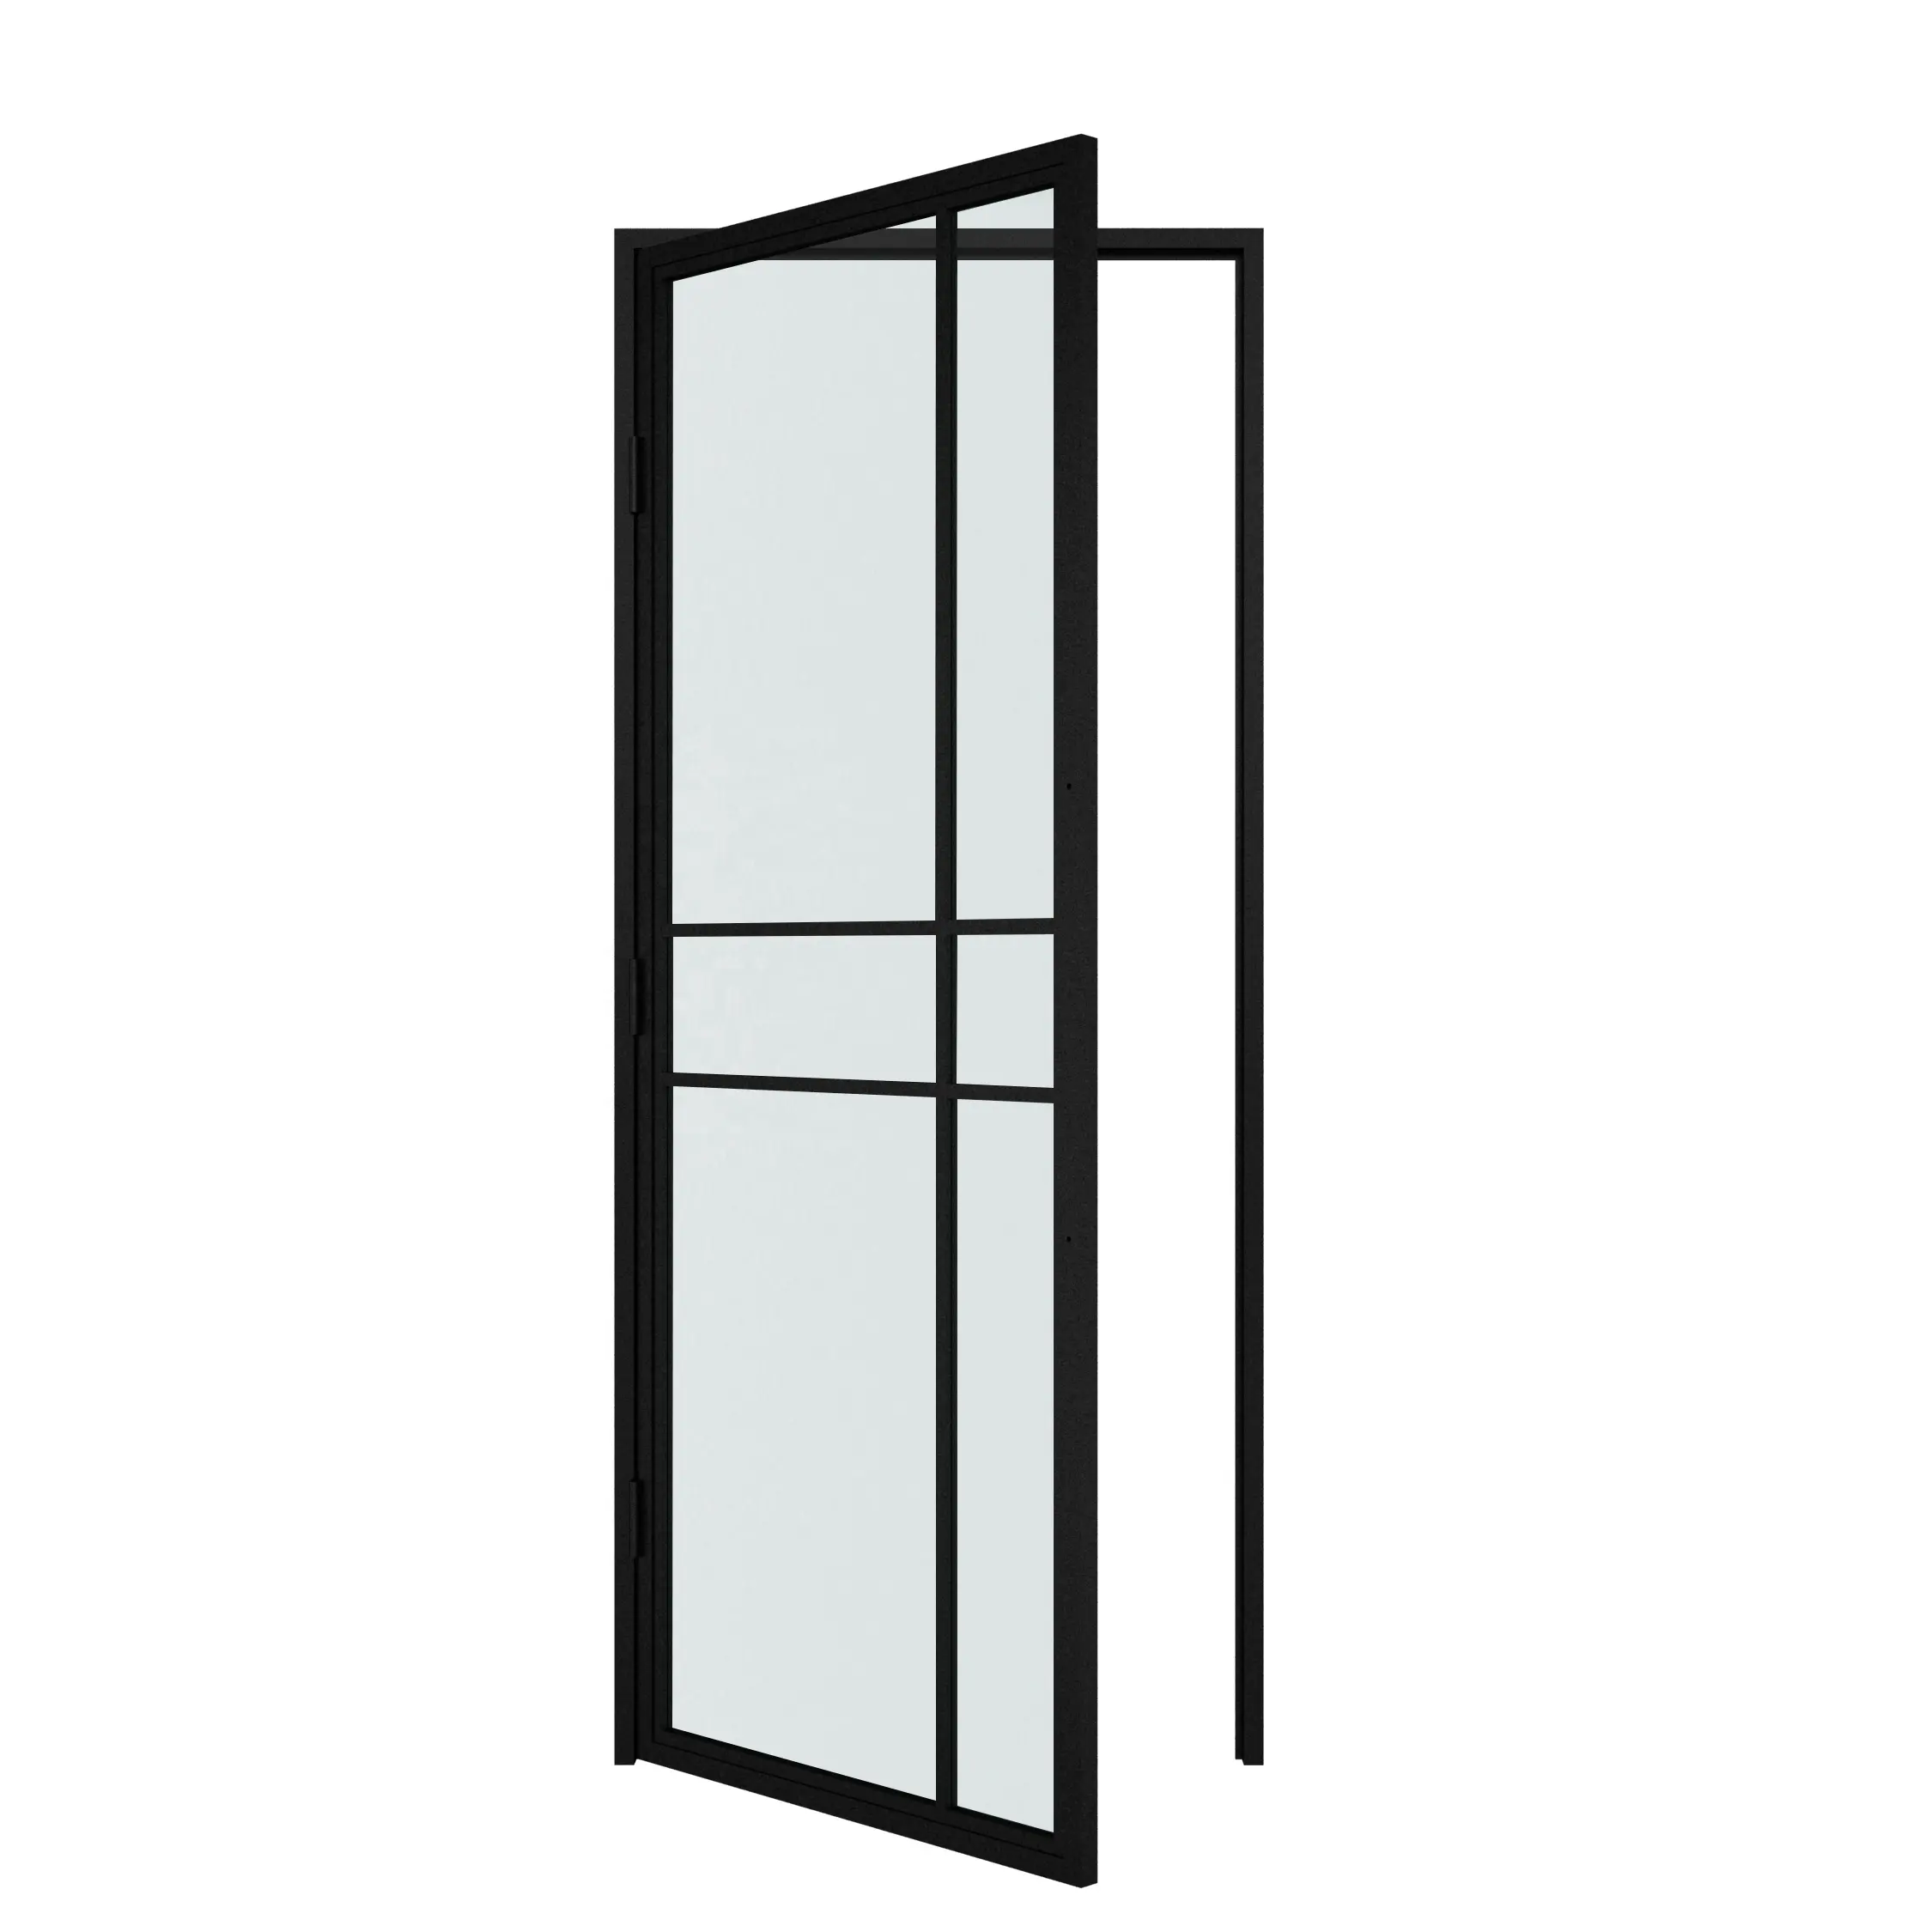 Steel Frame Glass Swing Door With Steel Frame And Hinges, metal framed glass door frosted customized design